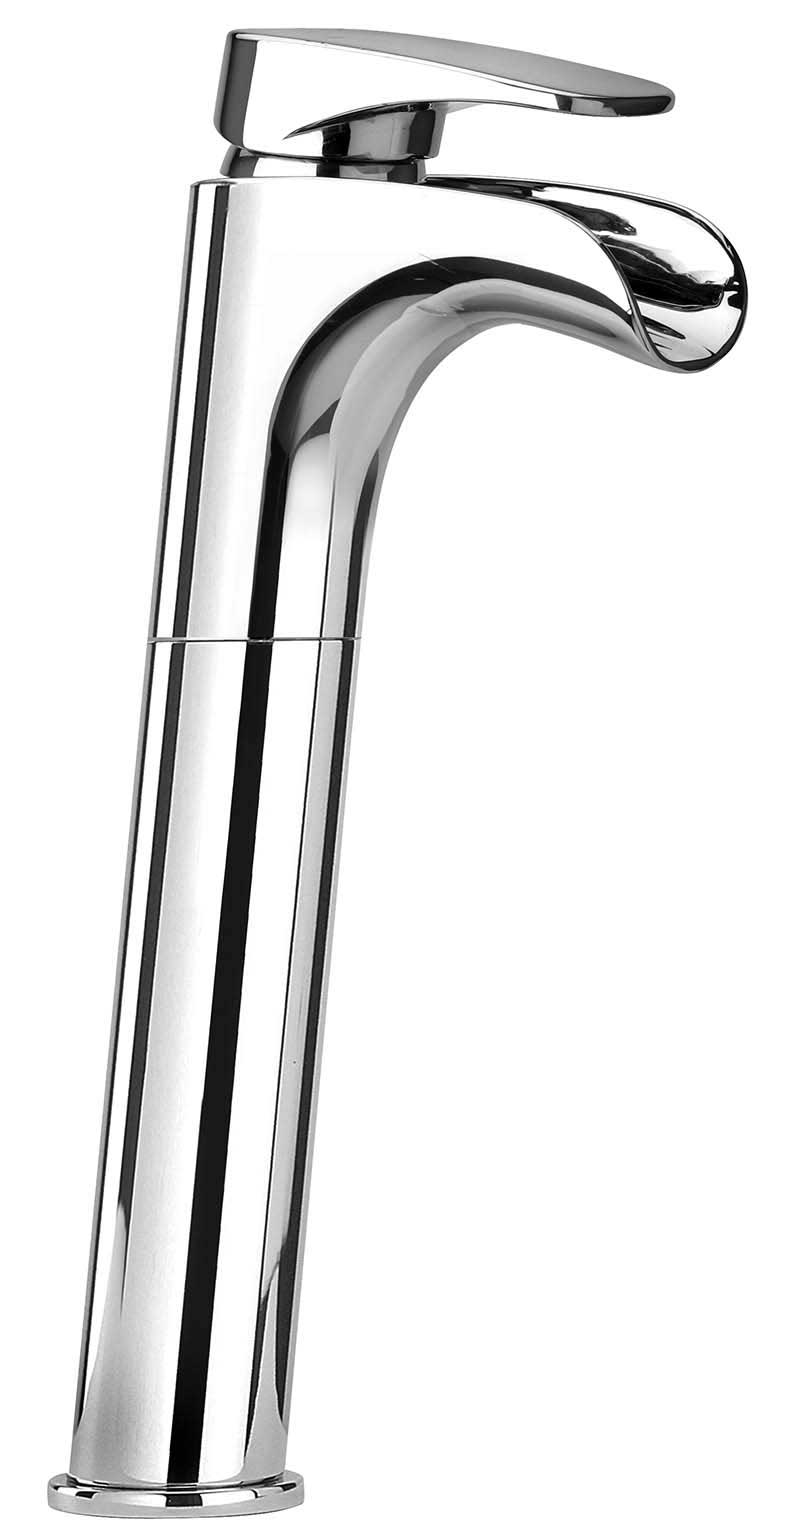 Jewel Faucets Single Loop Handle Tall Vessel Sink Faucet With Waterfall Spout with Designer Finish 10206WFS-X